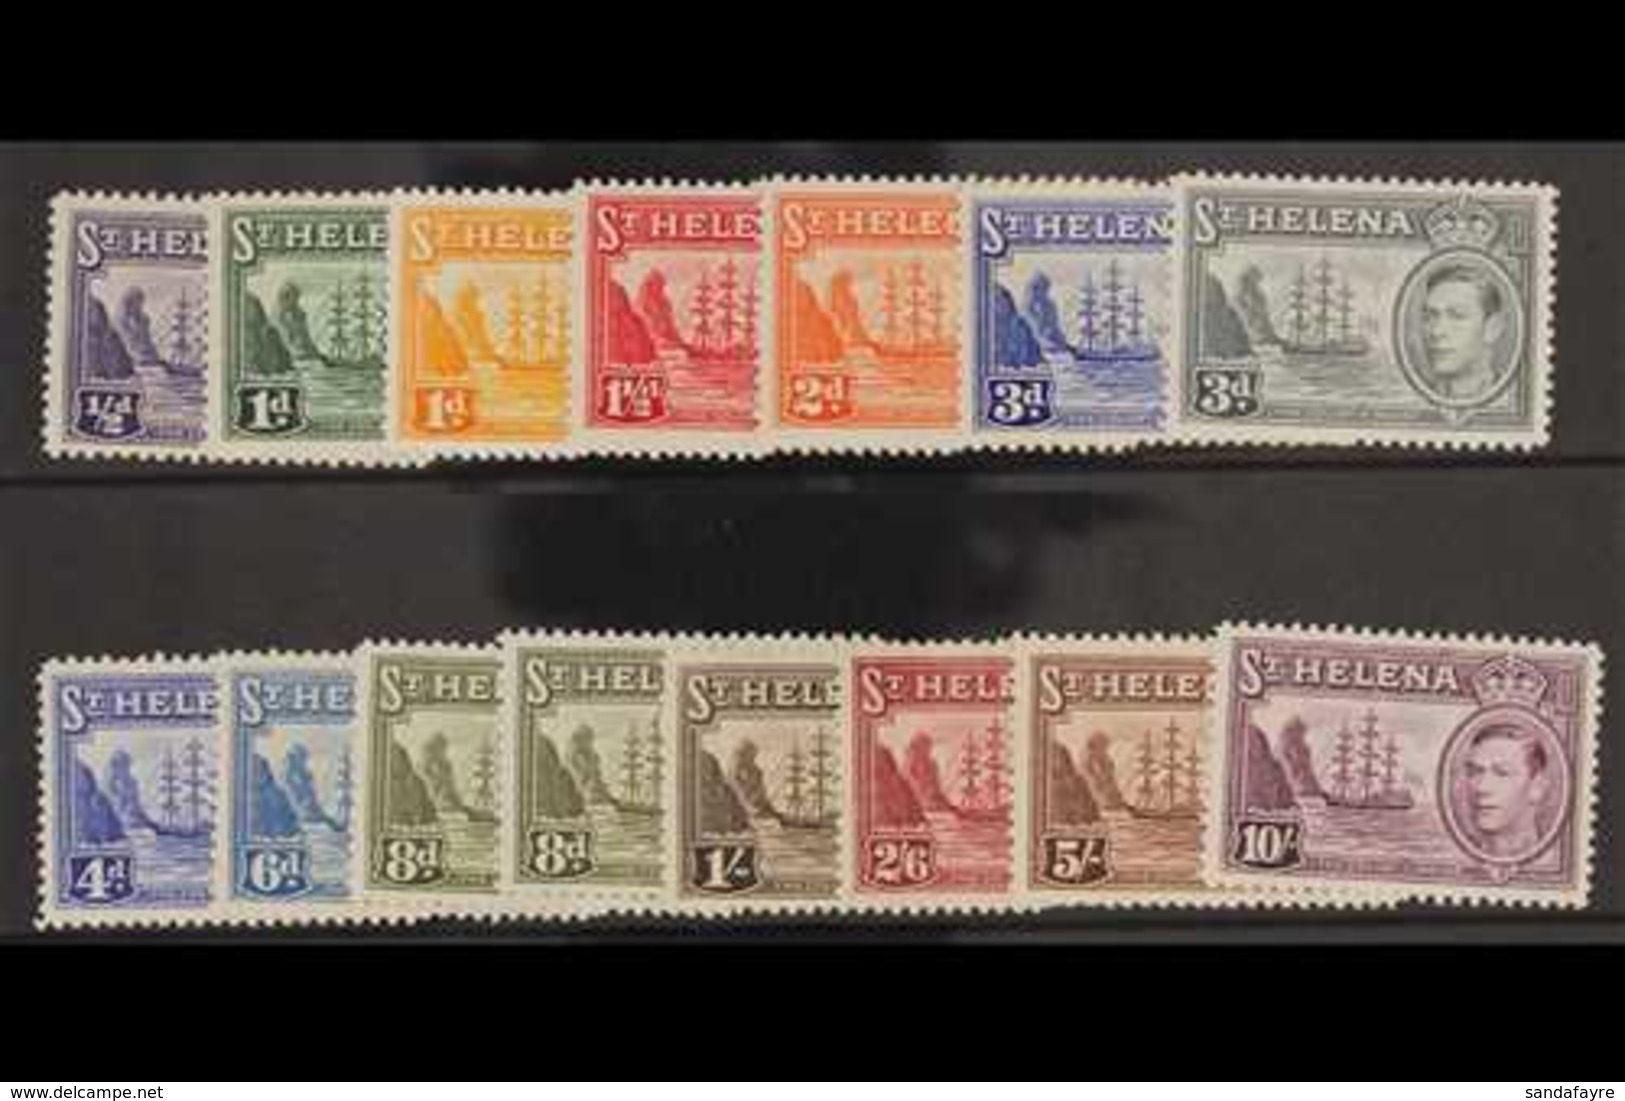 1938-44 Complete Definitive Set, SG 131/140, Plus 8d Listed Shade, Very Fine Mint. (15 Stamps) For More Images, Please V - Sint-Helena